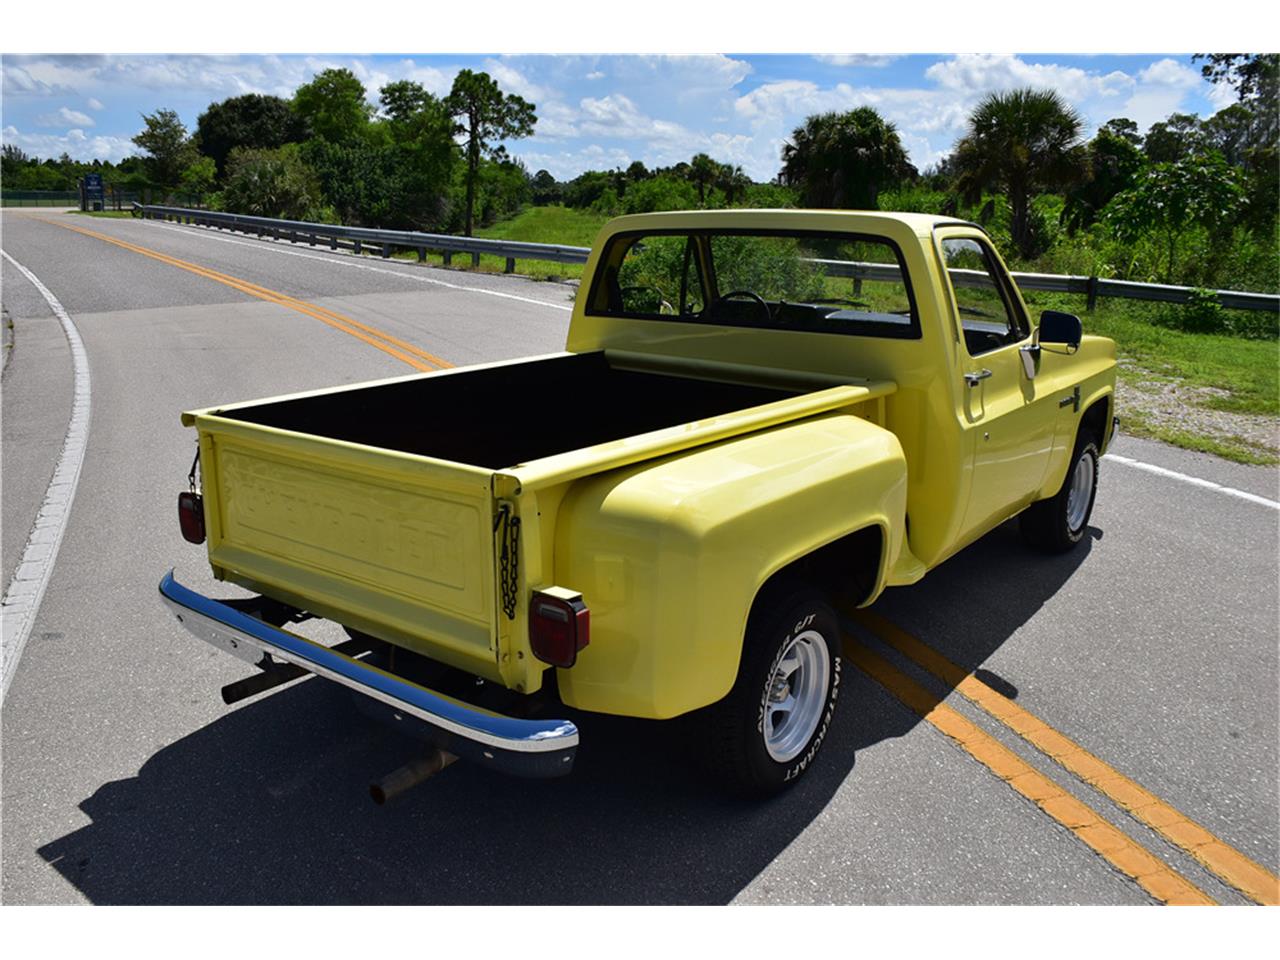 For Sale at Auction: 1987 Chevrolet Pickup for sale in West Palm Beach, FL